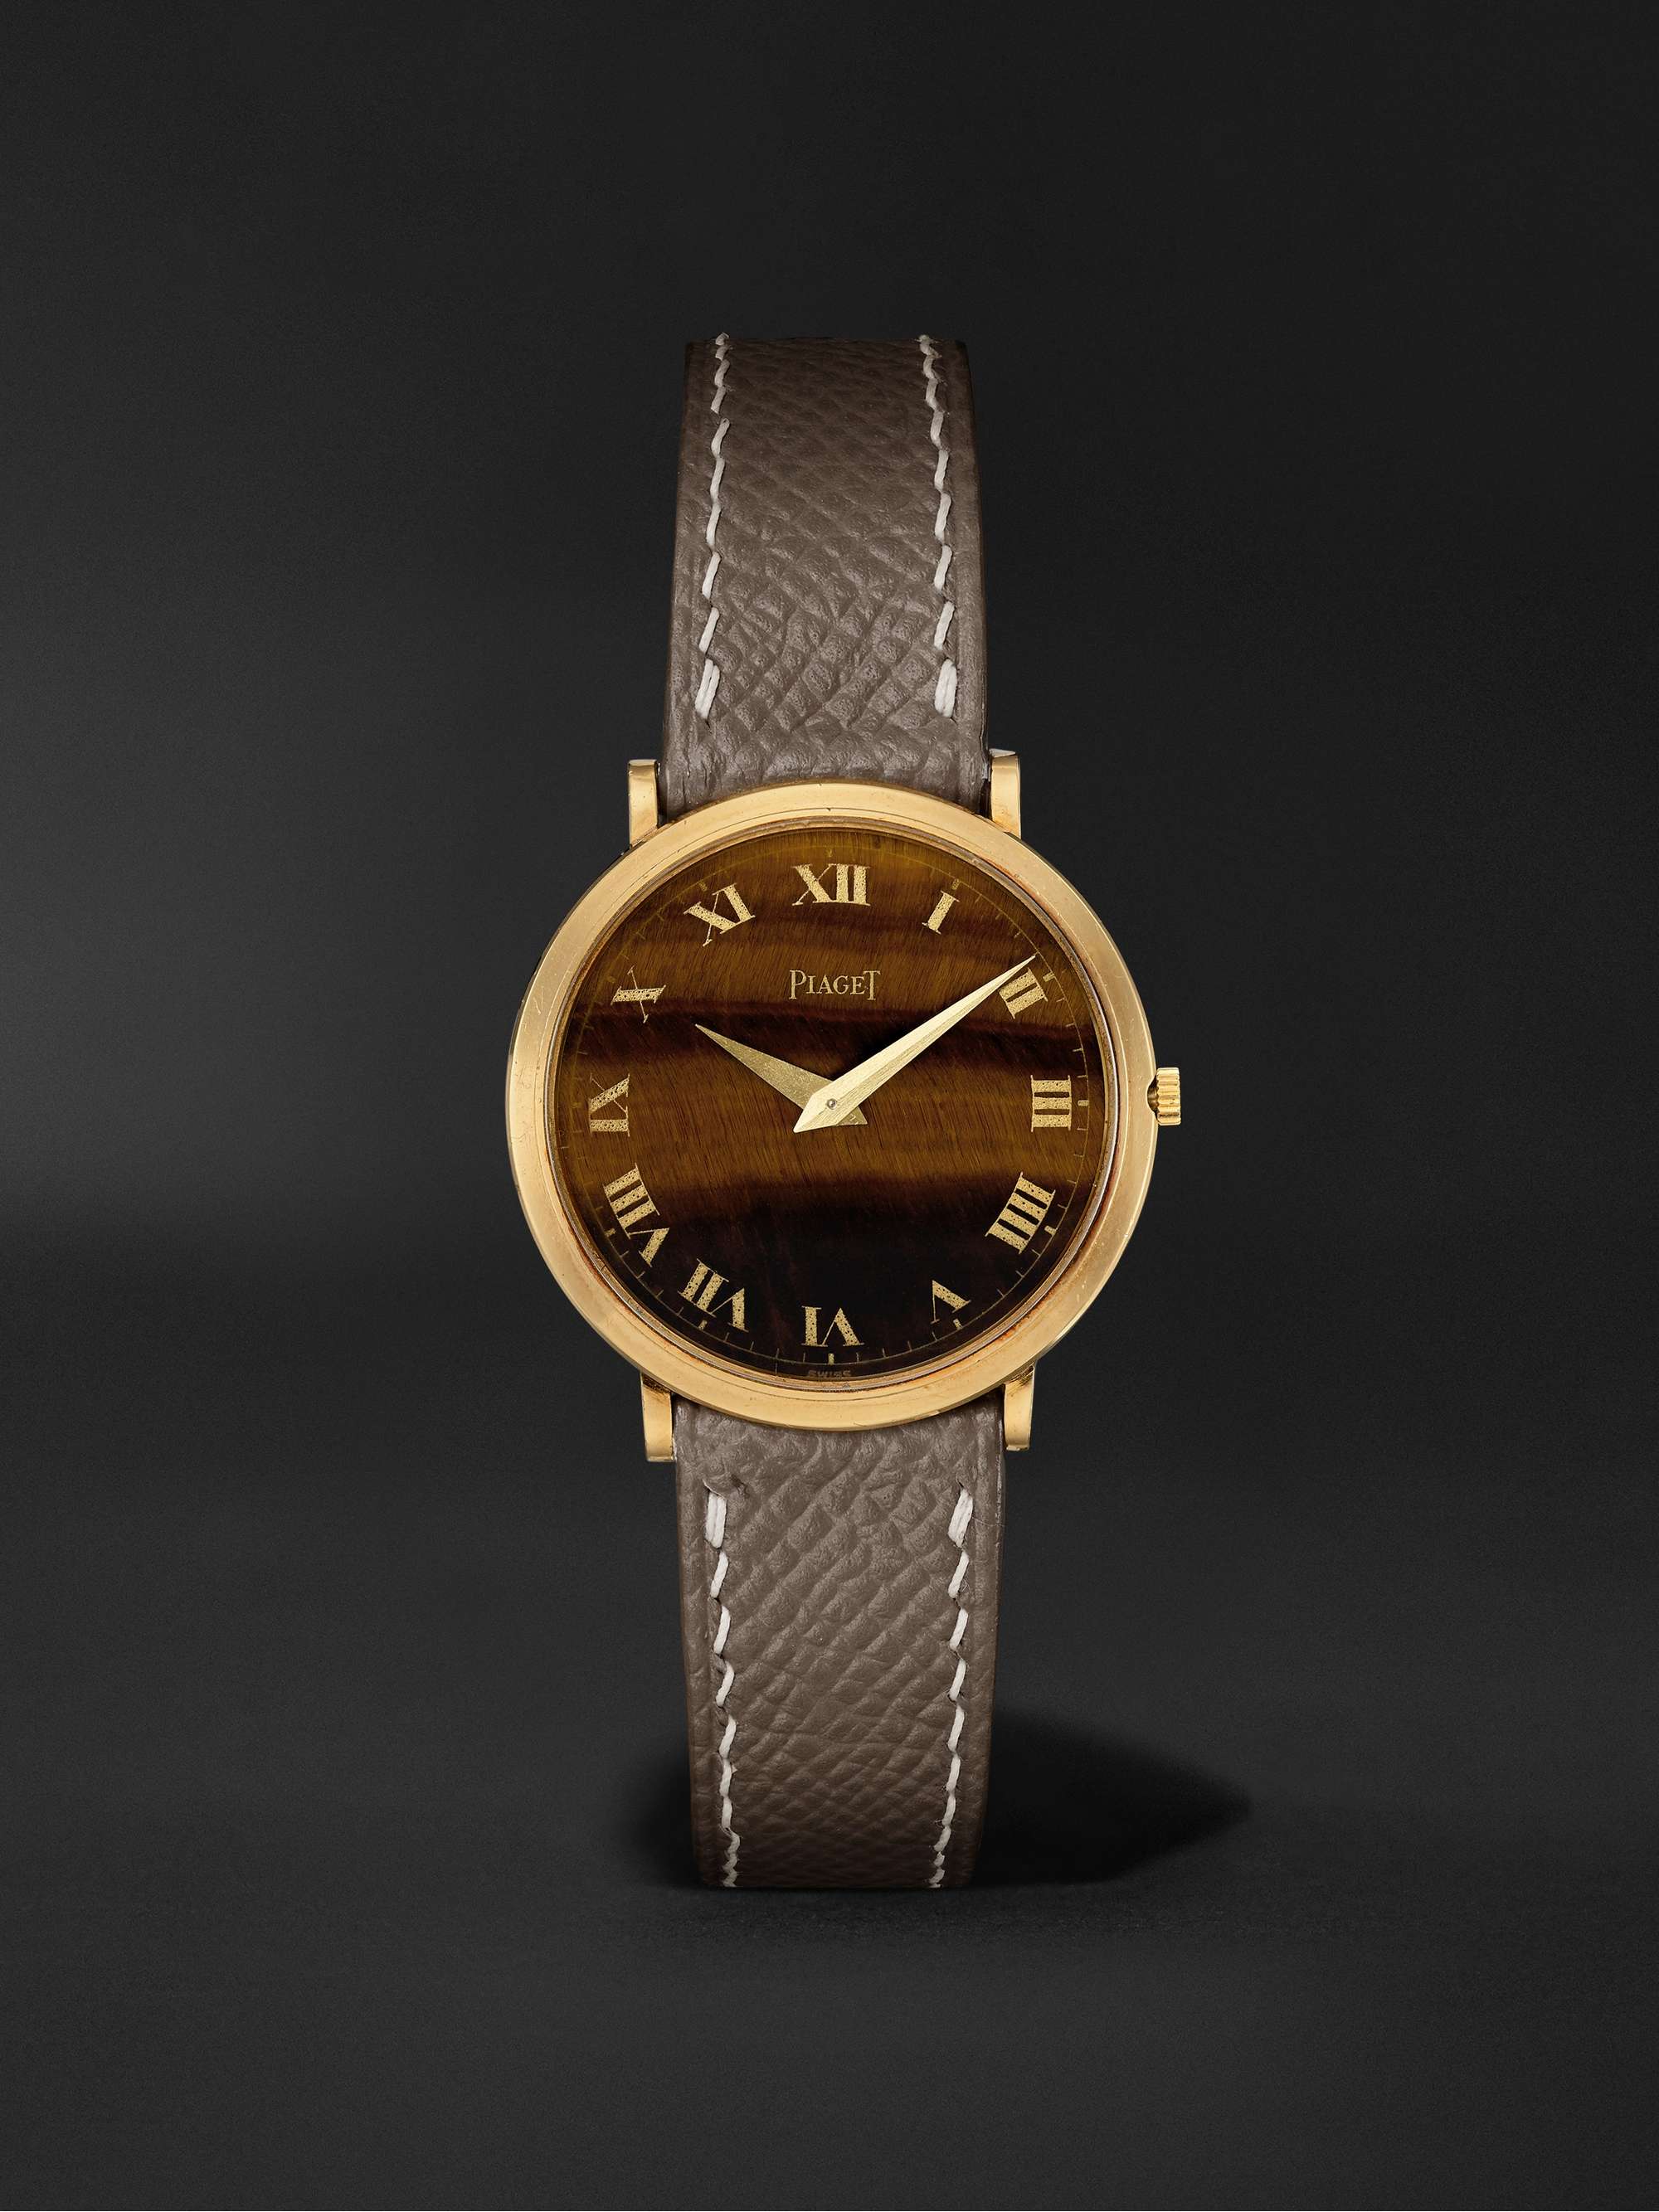 WATCH BROTHERS LONDON Vintage 1970s Piaget Ultra-Thin Tiger Eye Hand-Wound 31mm 18-Karat Gold and Leather Watch, Ref. No. 902